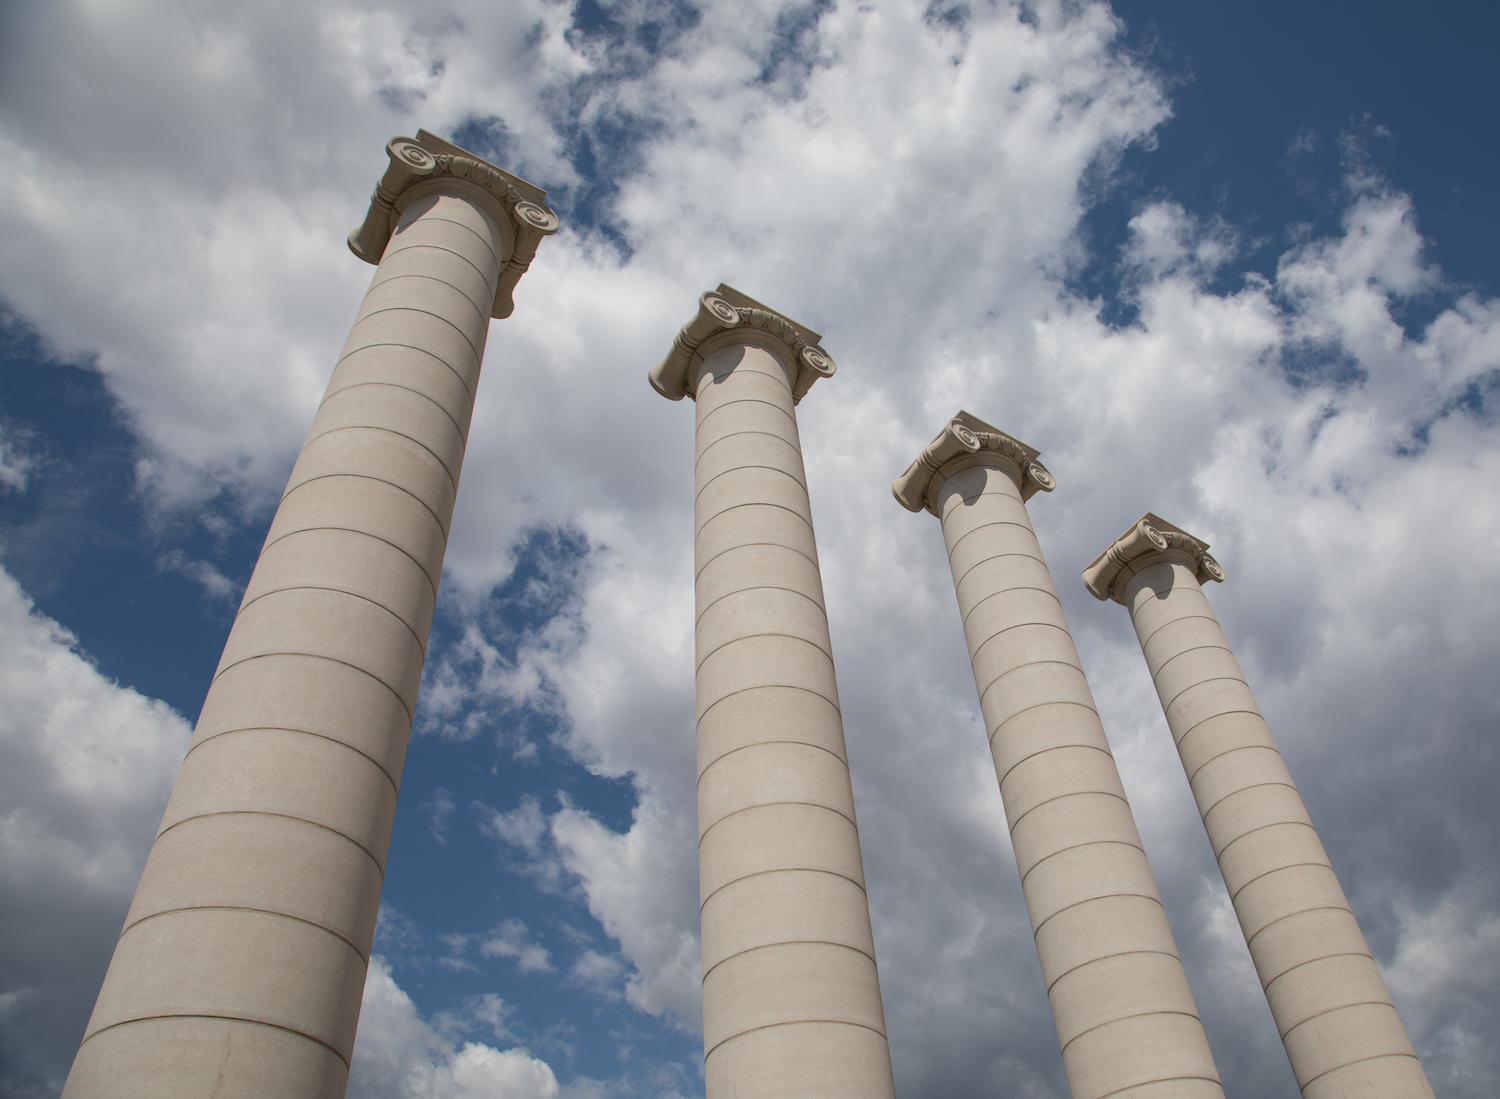 Barcelona Columns by Laurie McShane